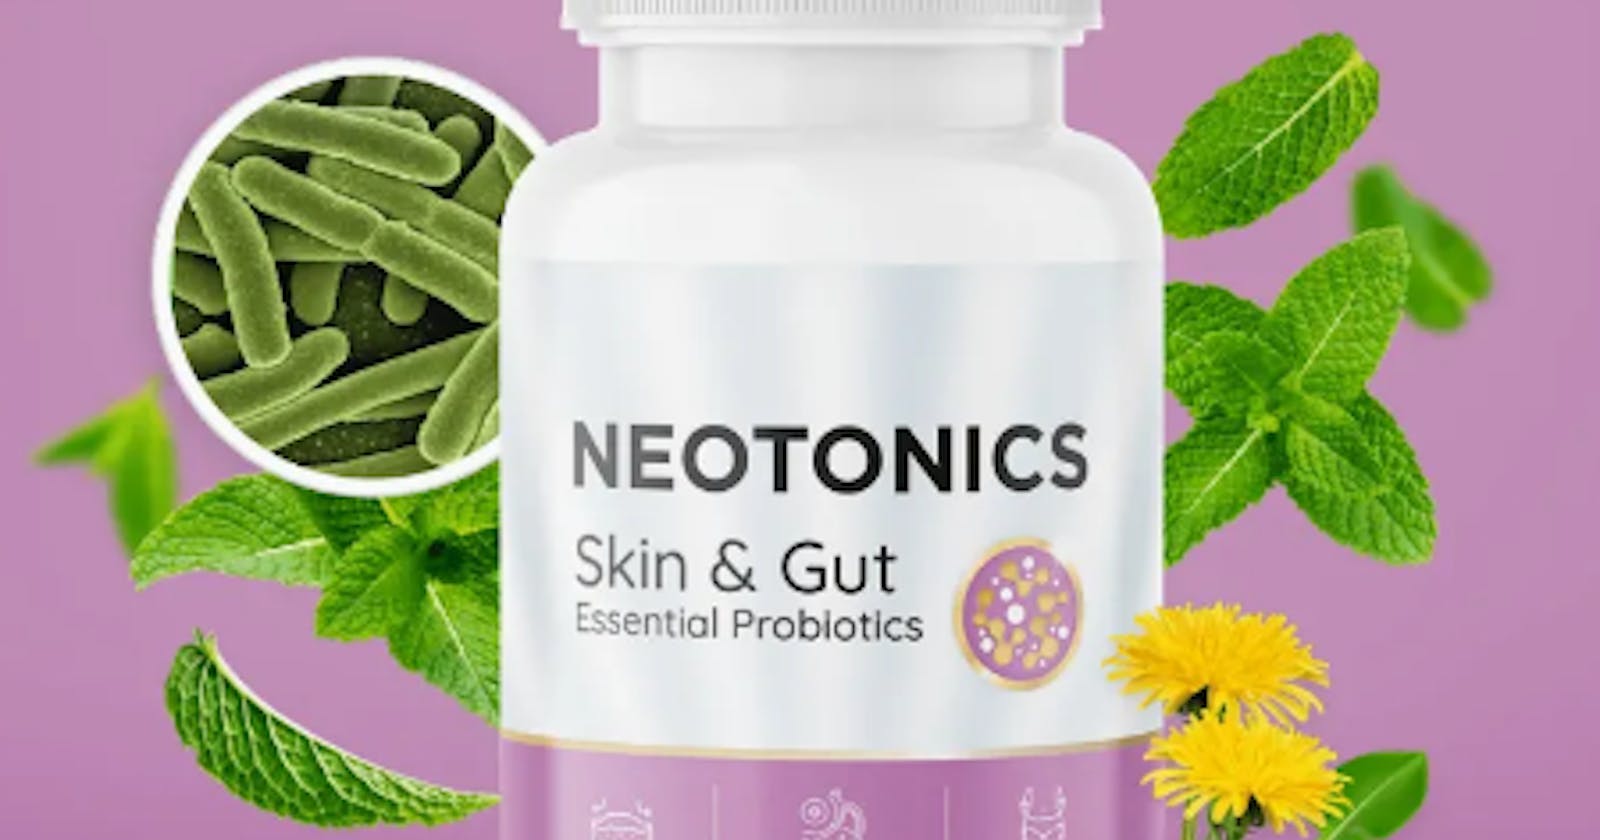 How to Achieve Healthy Skin and Gut with NeoTonics